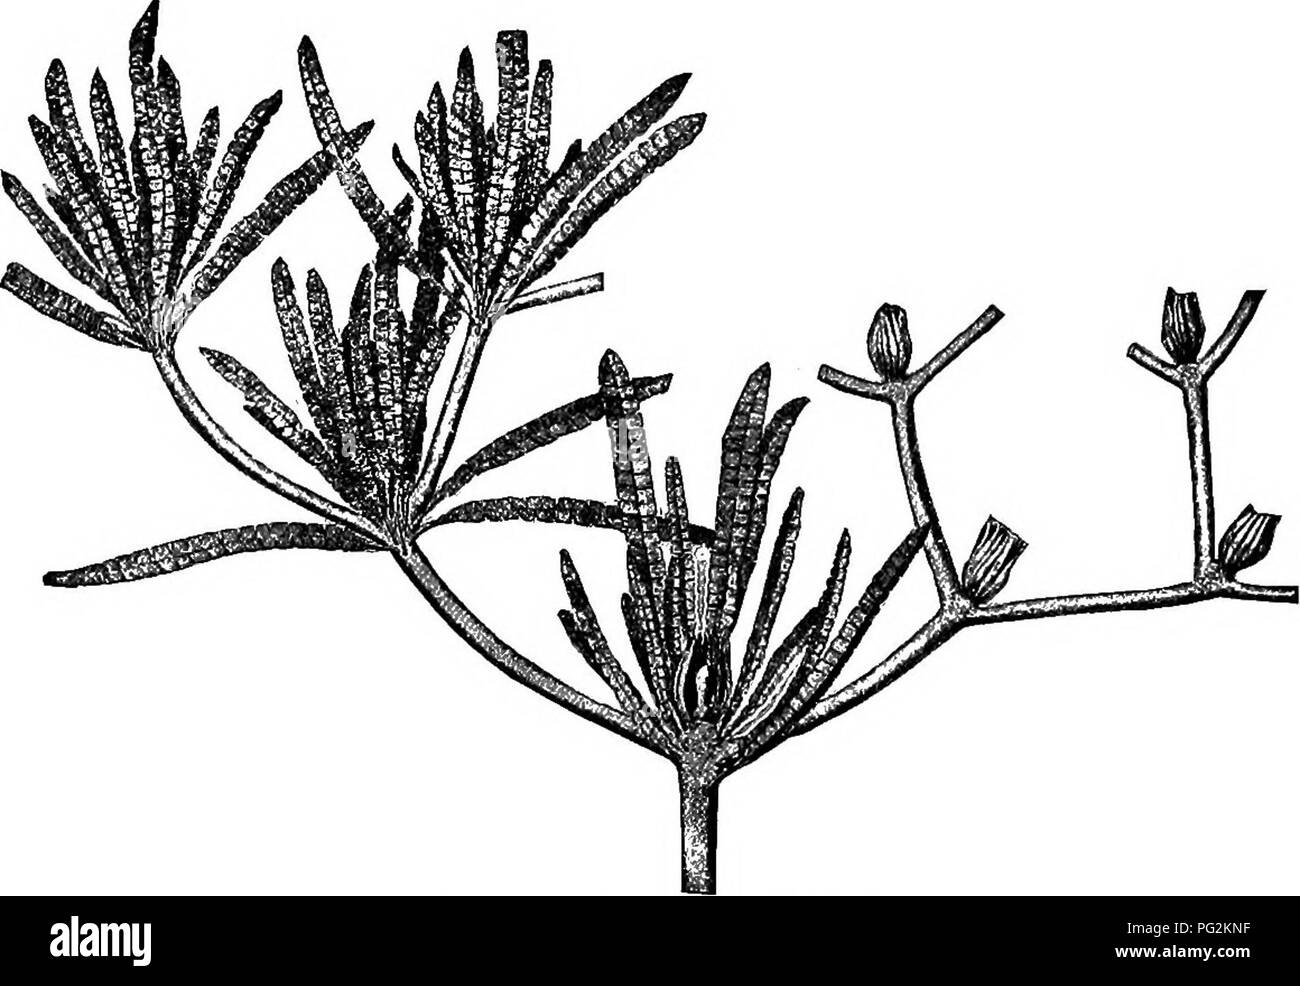 Morphology of gymnosperms. Gymnosperms; Plant morphology. BENNETTITALES 69  forks of the widely spreading branches (also in Wielandiella), evi- dendy  being terminal structures, and the narrow pinnate leaves, only 7-8 cm. long,